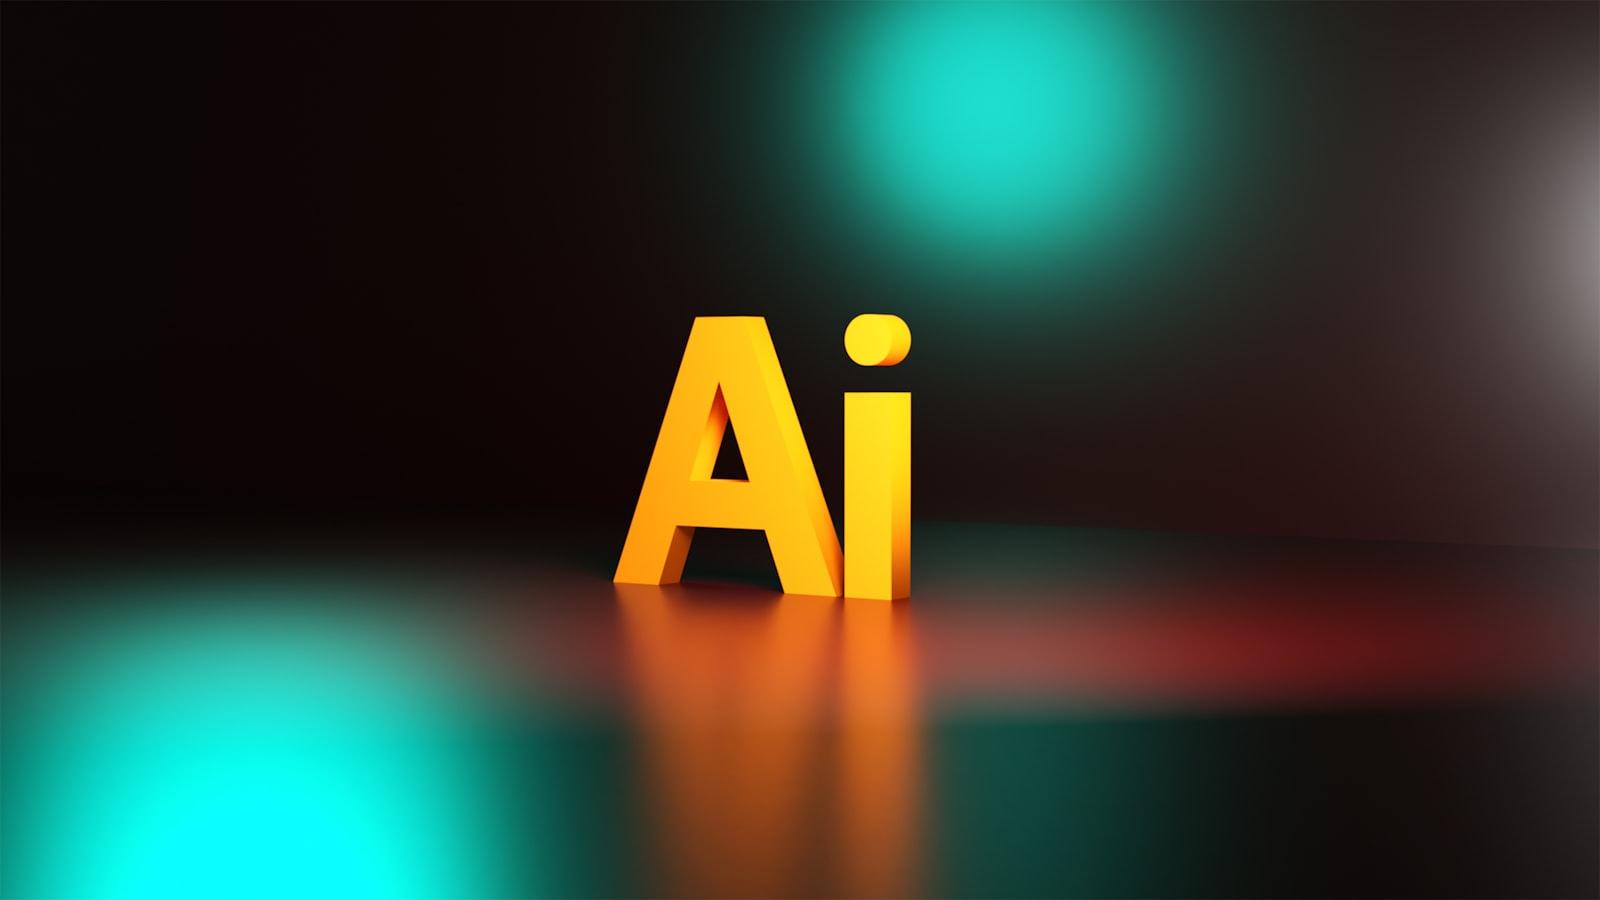 The full potential of AI in techno-optimism